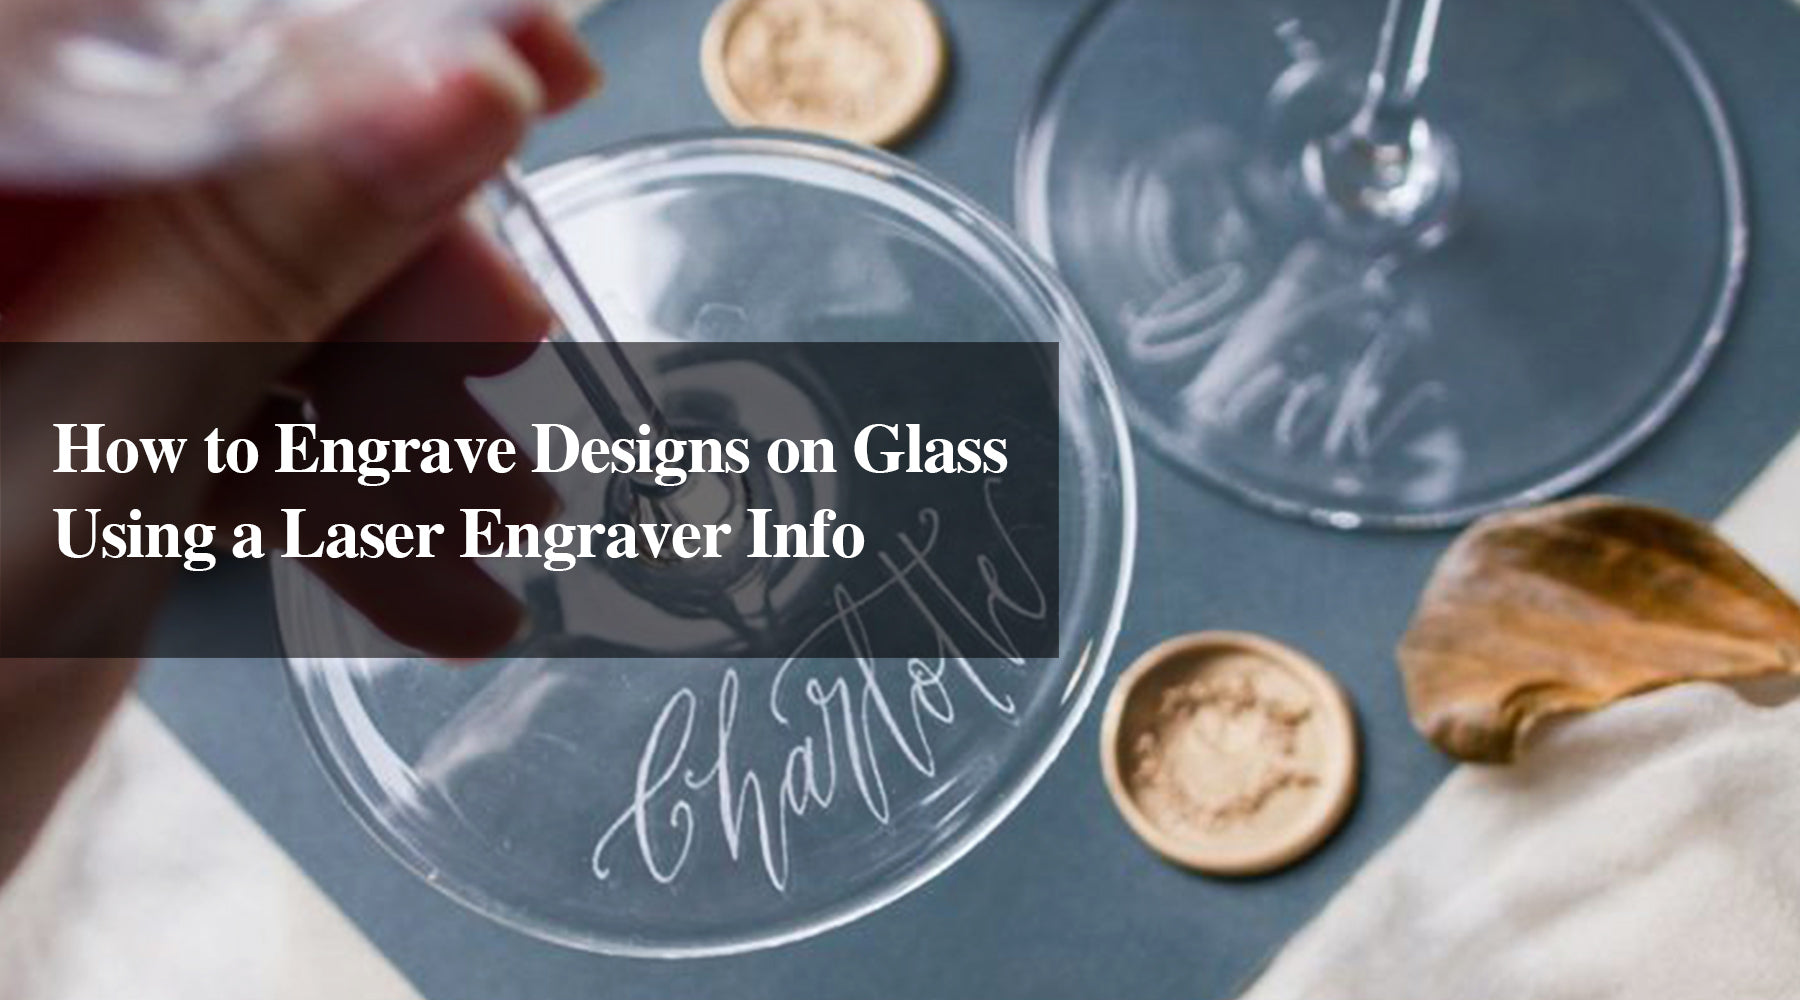 How to Engrave Designs on Glass Using a Laser Engraver